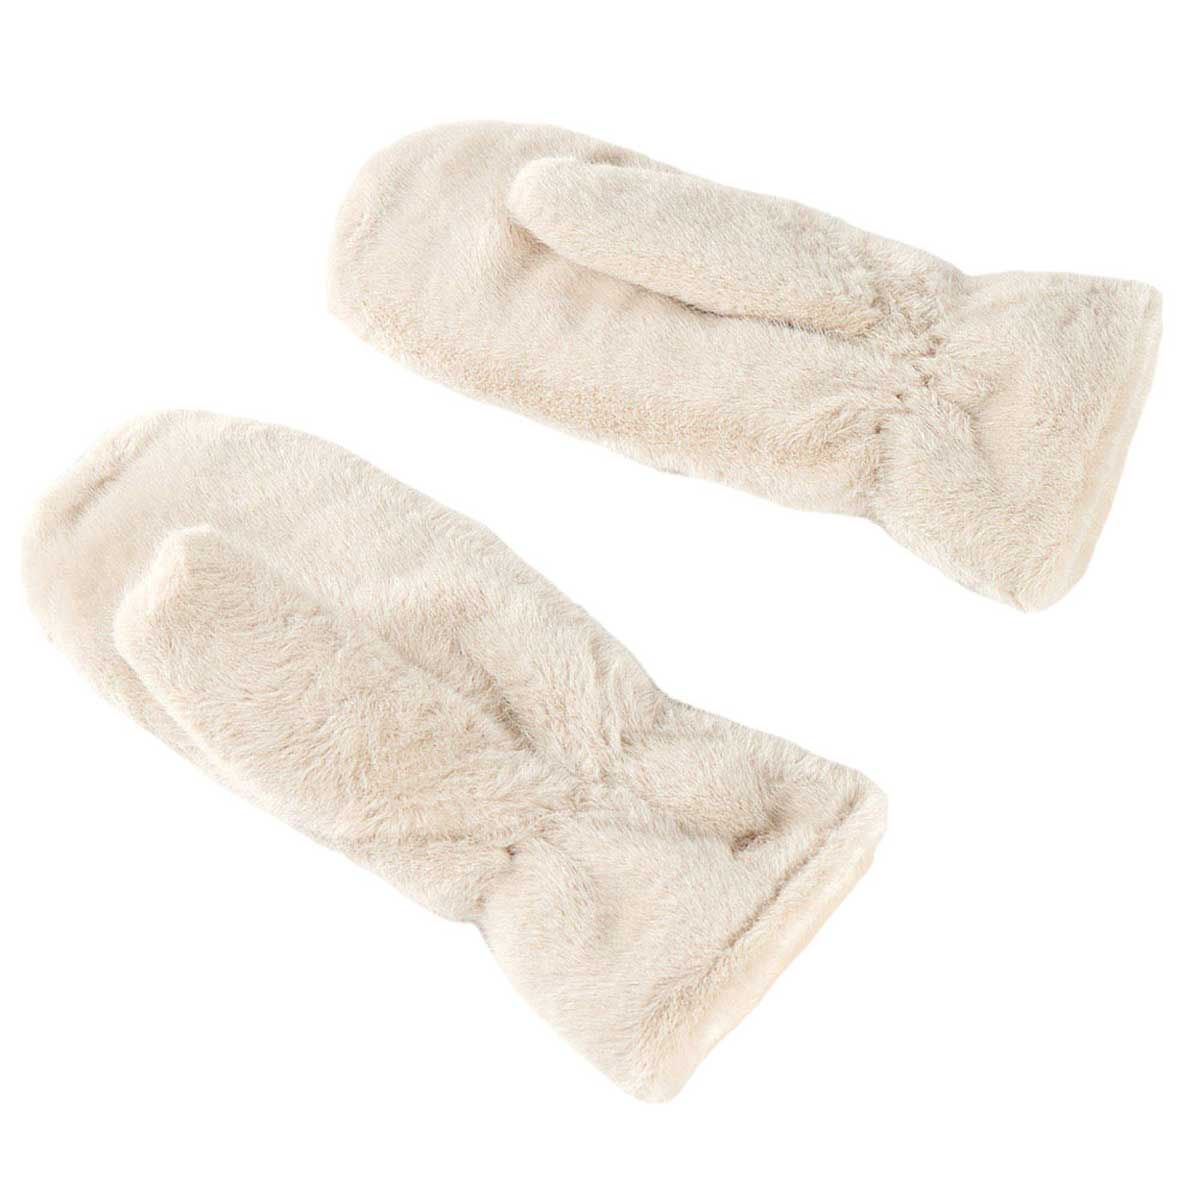 Beige Faux Fur Mitten Gloves, are a smart, eye-catching, and attractive addition to your outfit. These trendy gloves keep you absolutely warm and toasty in the winter and cold weather outside. It's the autumnal touch you need to finish your outfit in style. A pair of these gloves will be a nice gift for loving one.